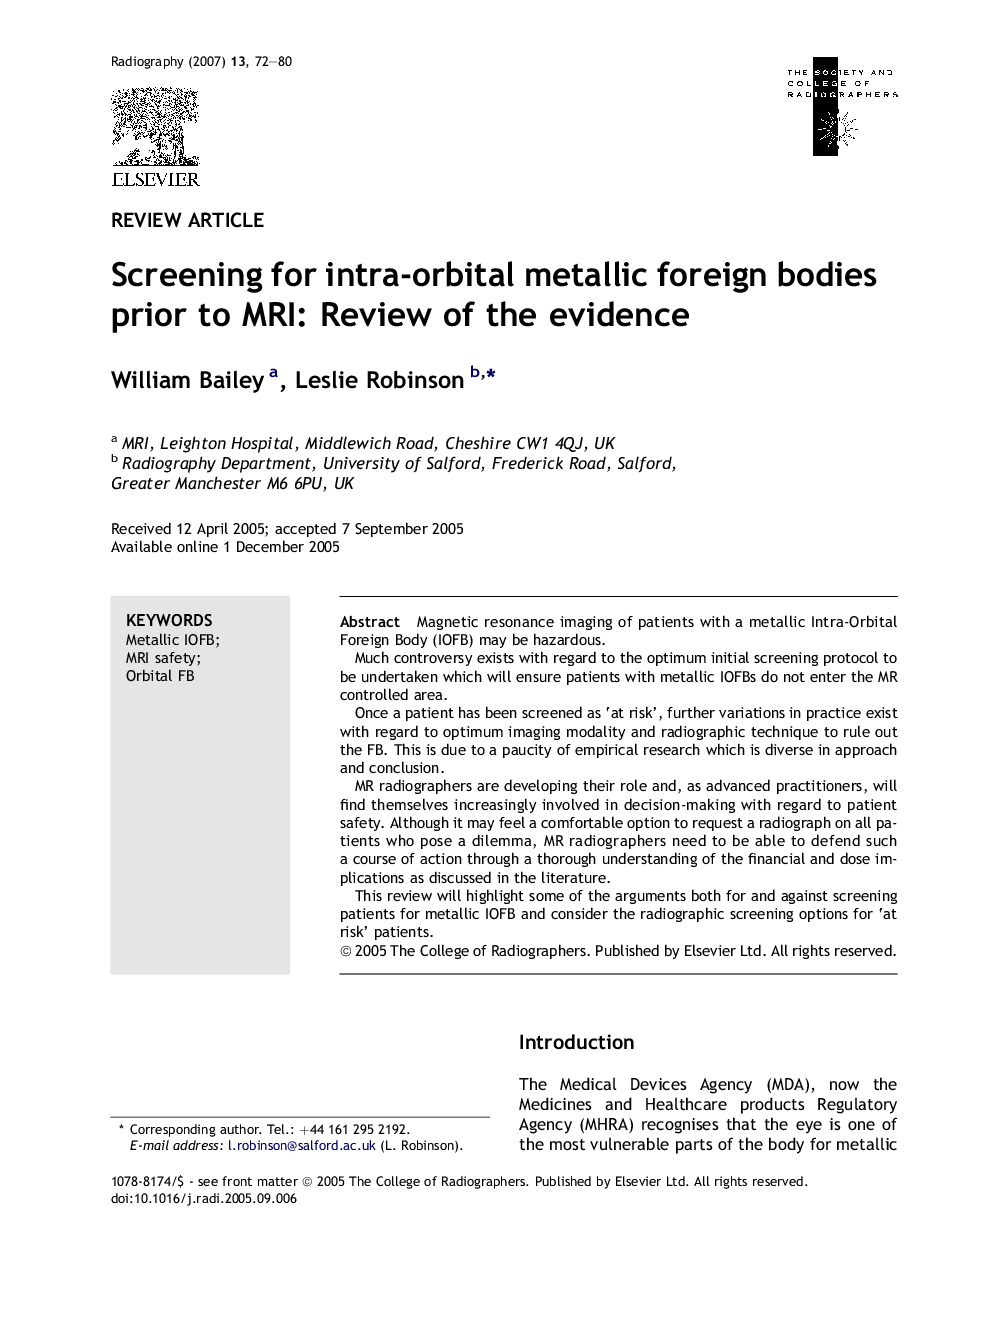 Screening for intra-orbital metallic foreign bodies prior to MRI: Review of the evidence